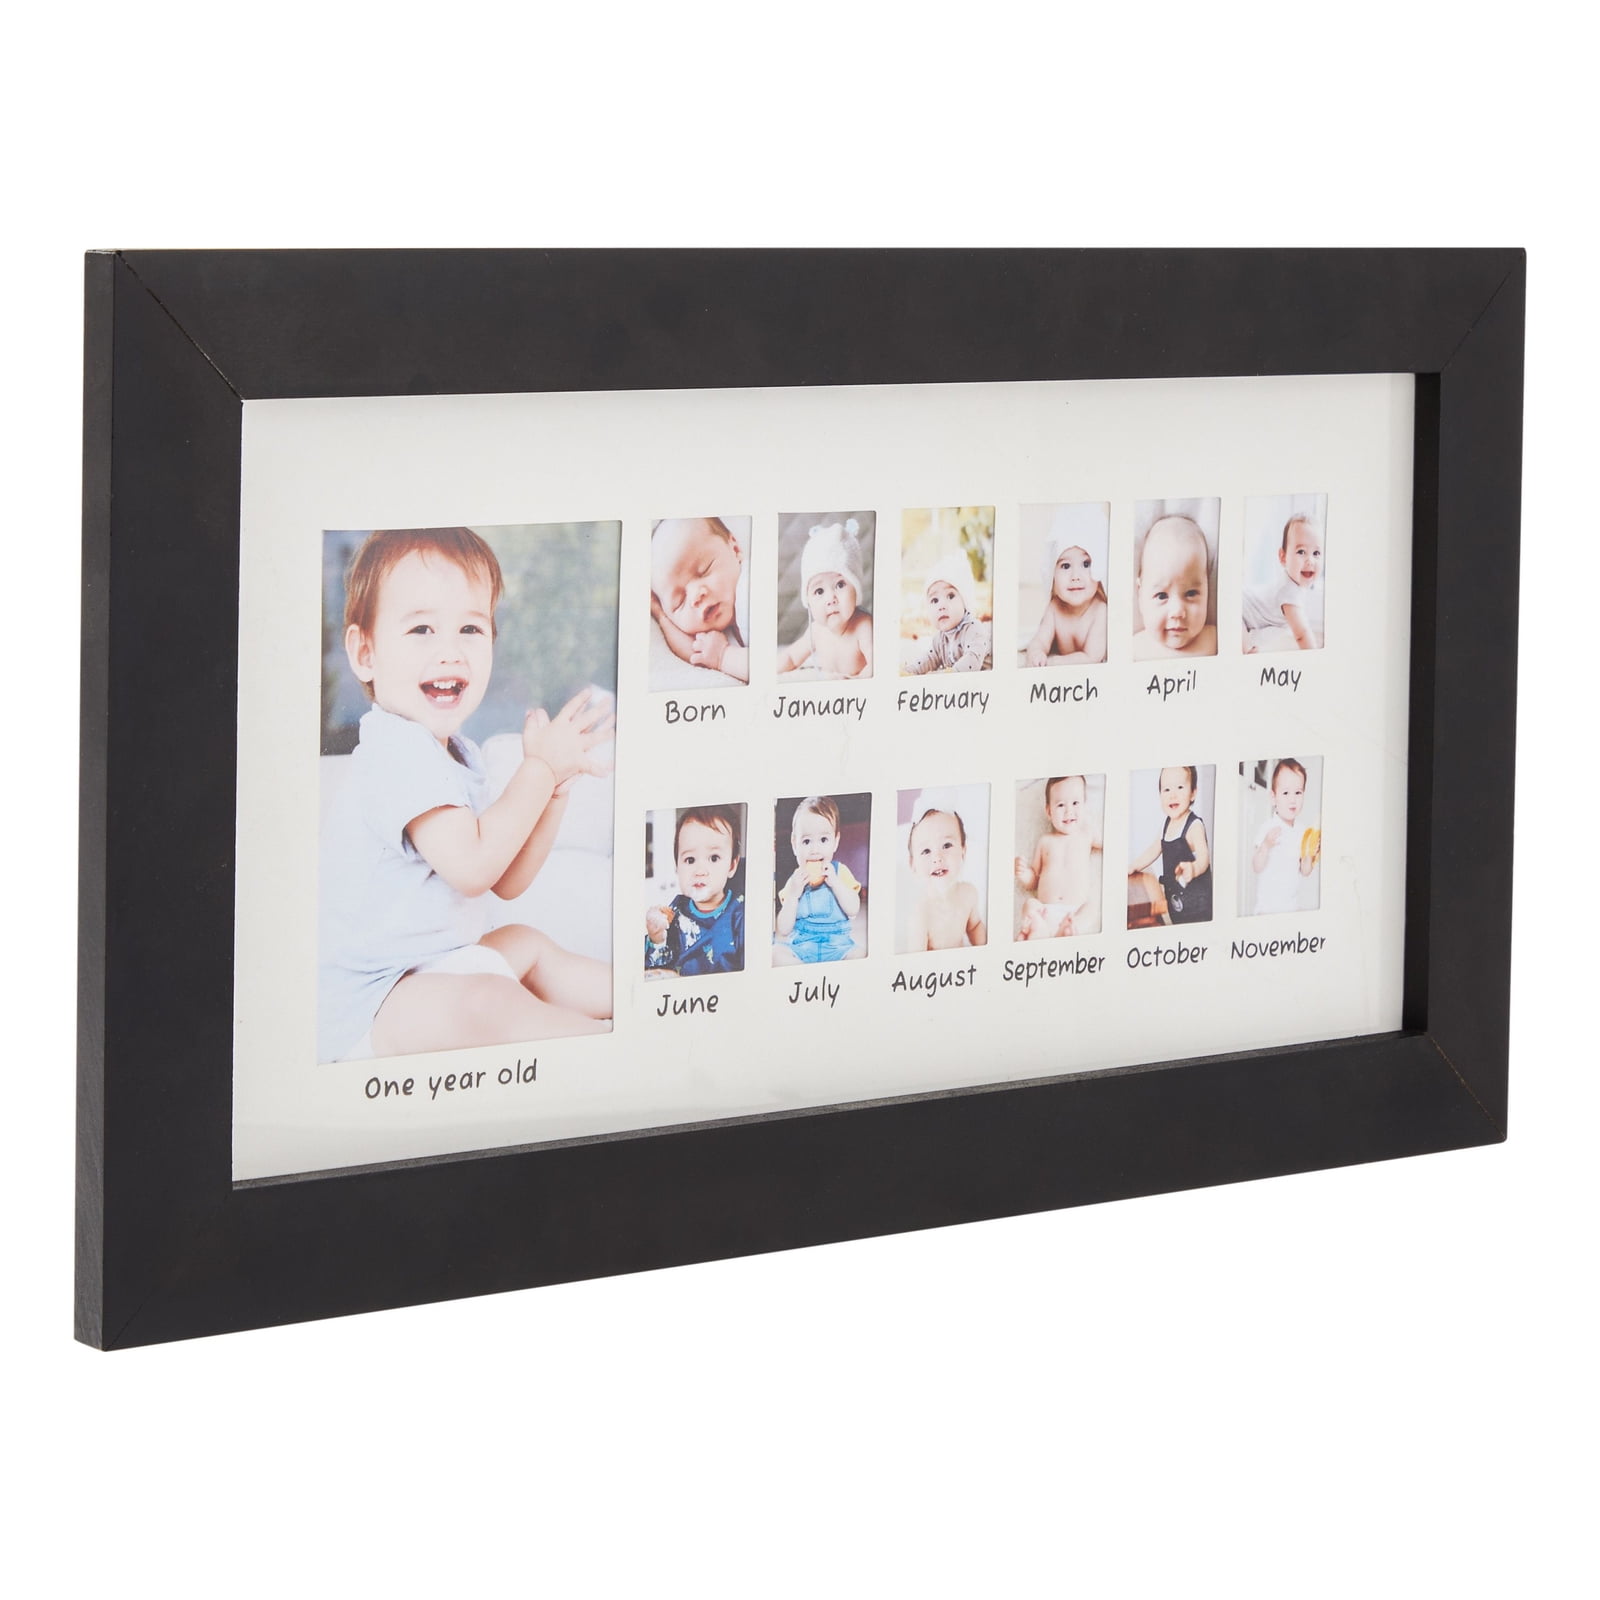 My First Year Photo Frame Multi Photo Frame 13 Photos Birthday Occasion Gifts 